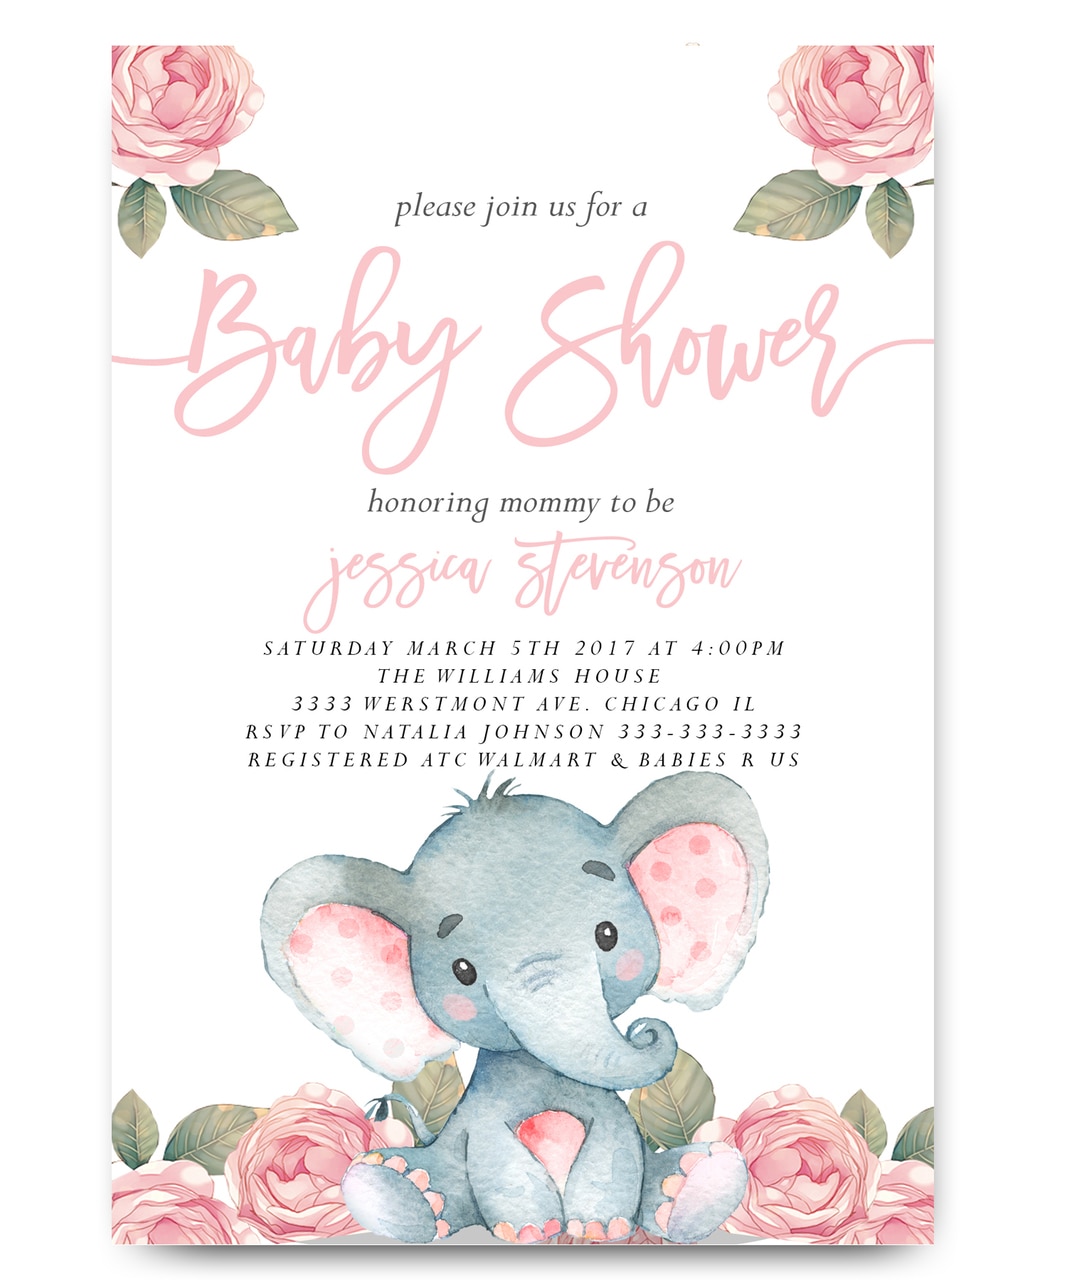 Full Size of Baby Shower:inspirational Elephant Baby Shower Invitations Photo Concepts Elephant Baby Shower Invitations Elephant Baby Shower Invitation Pink Floral Elephant